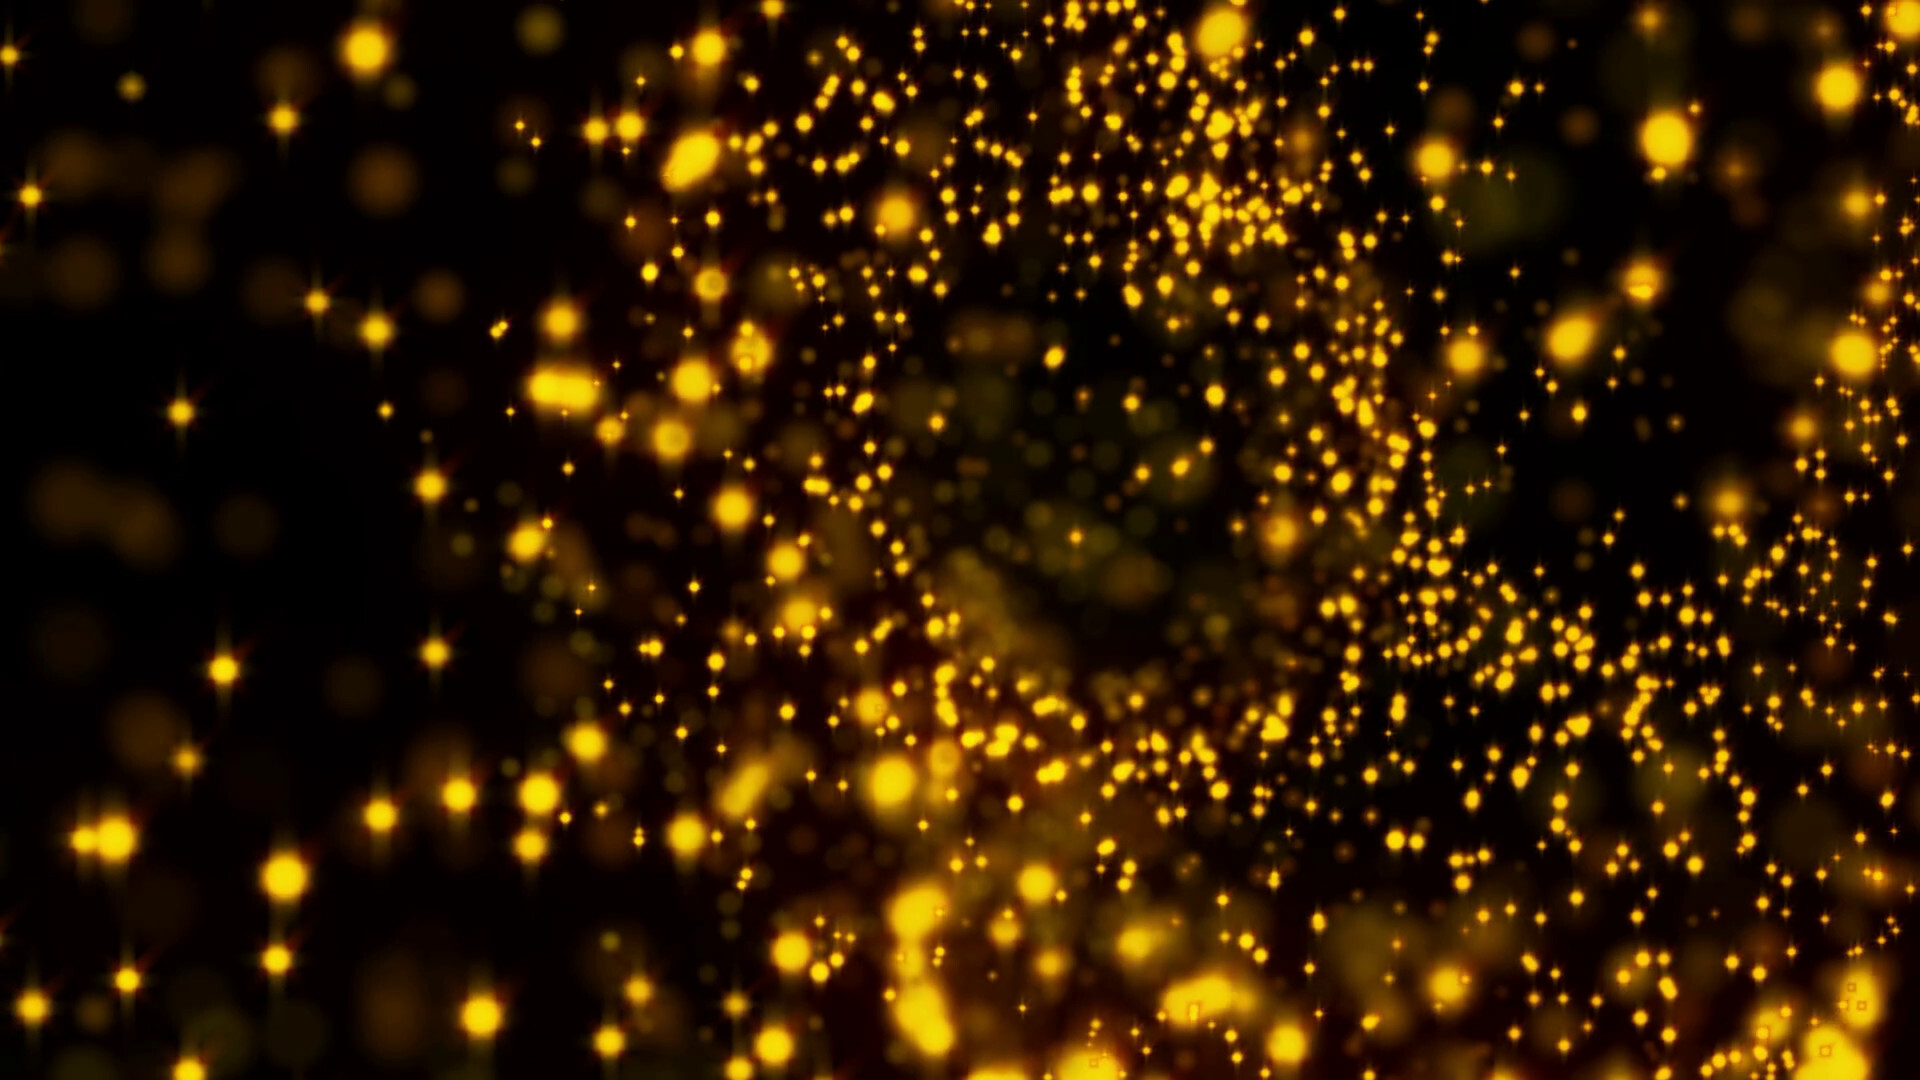 Gold Dots: Christmas blurred decorative holiday lights through the window, Bokeh effect. 1920x1080 Full HD Background.